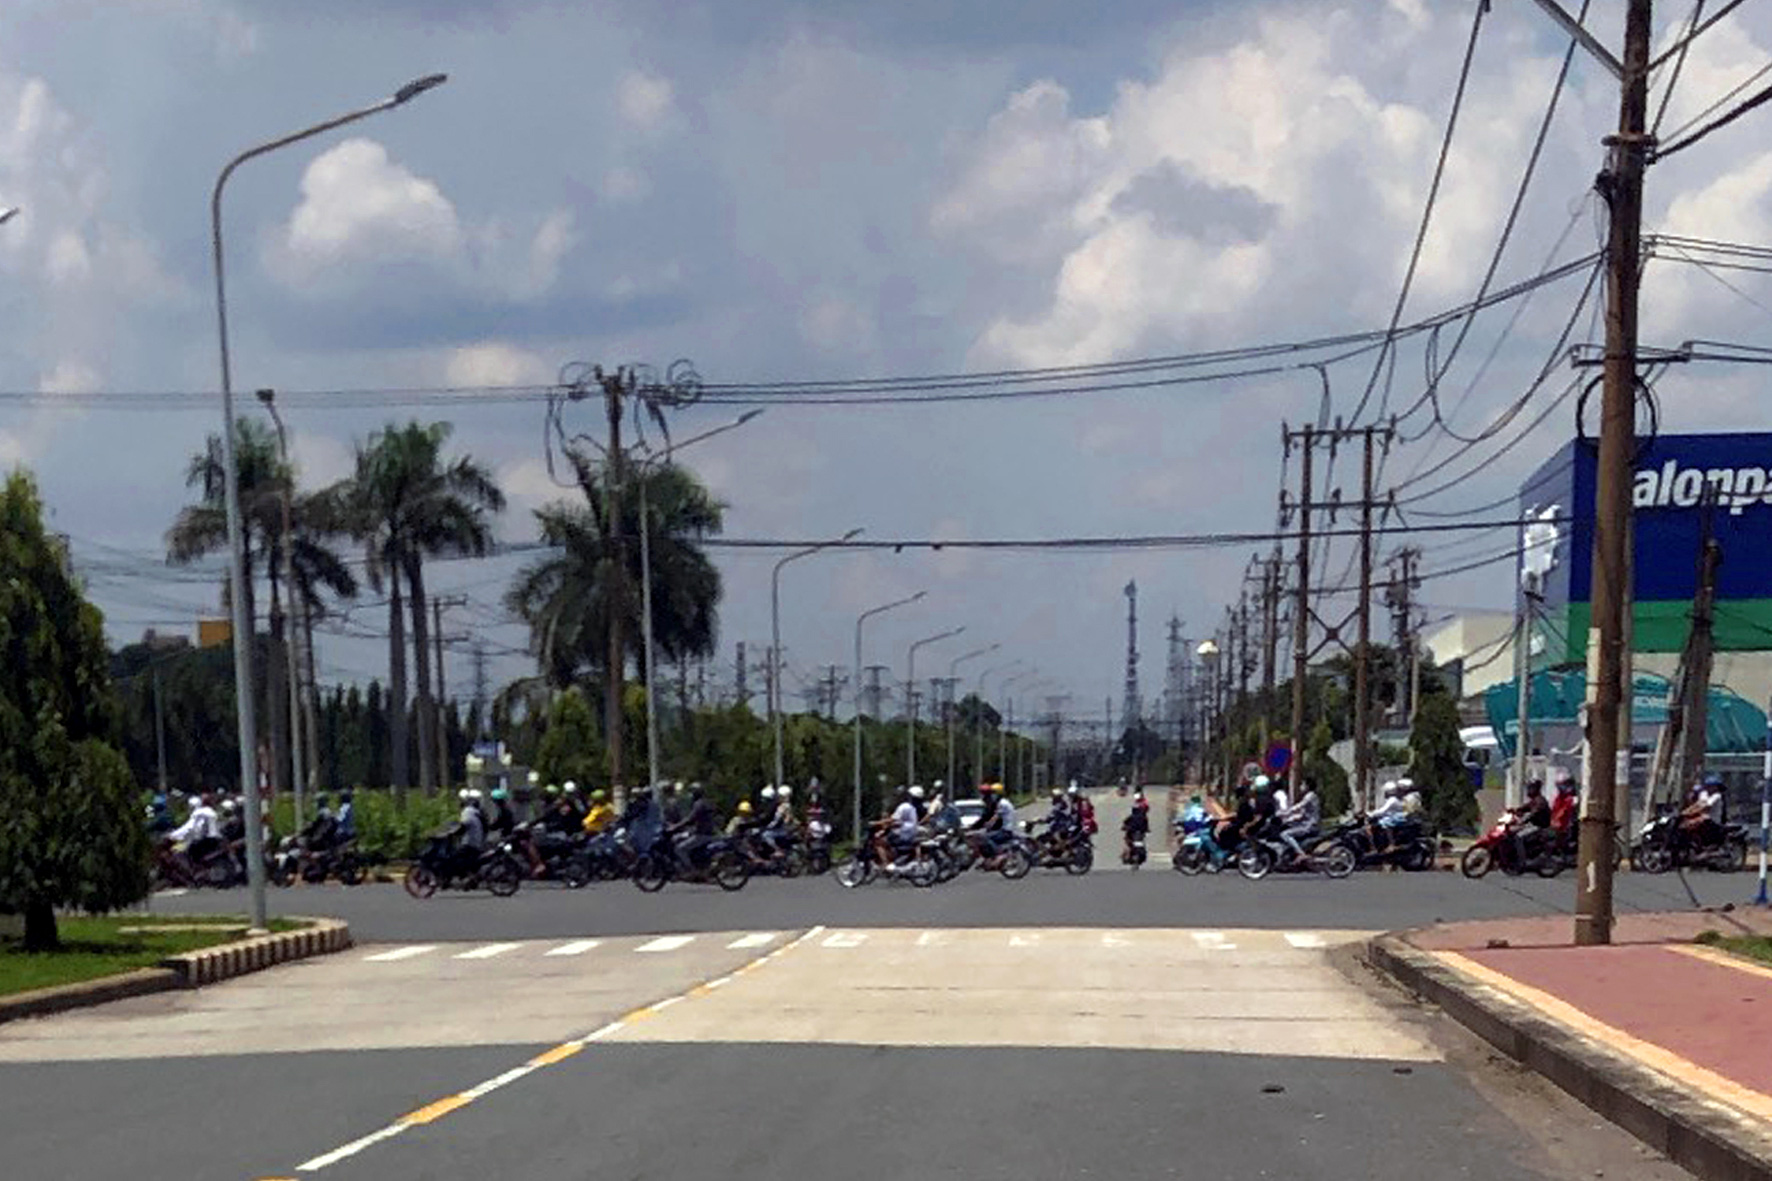 Dozens gather for an illegal motorbike race within the Bien Hoa 2 Industrial Park in Bien Hoa City, Dong Nai Province, Vietnam, August 16, 2020. Photo: B.A. / Tuoi Tre